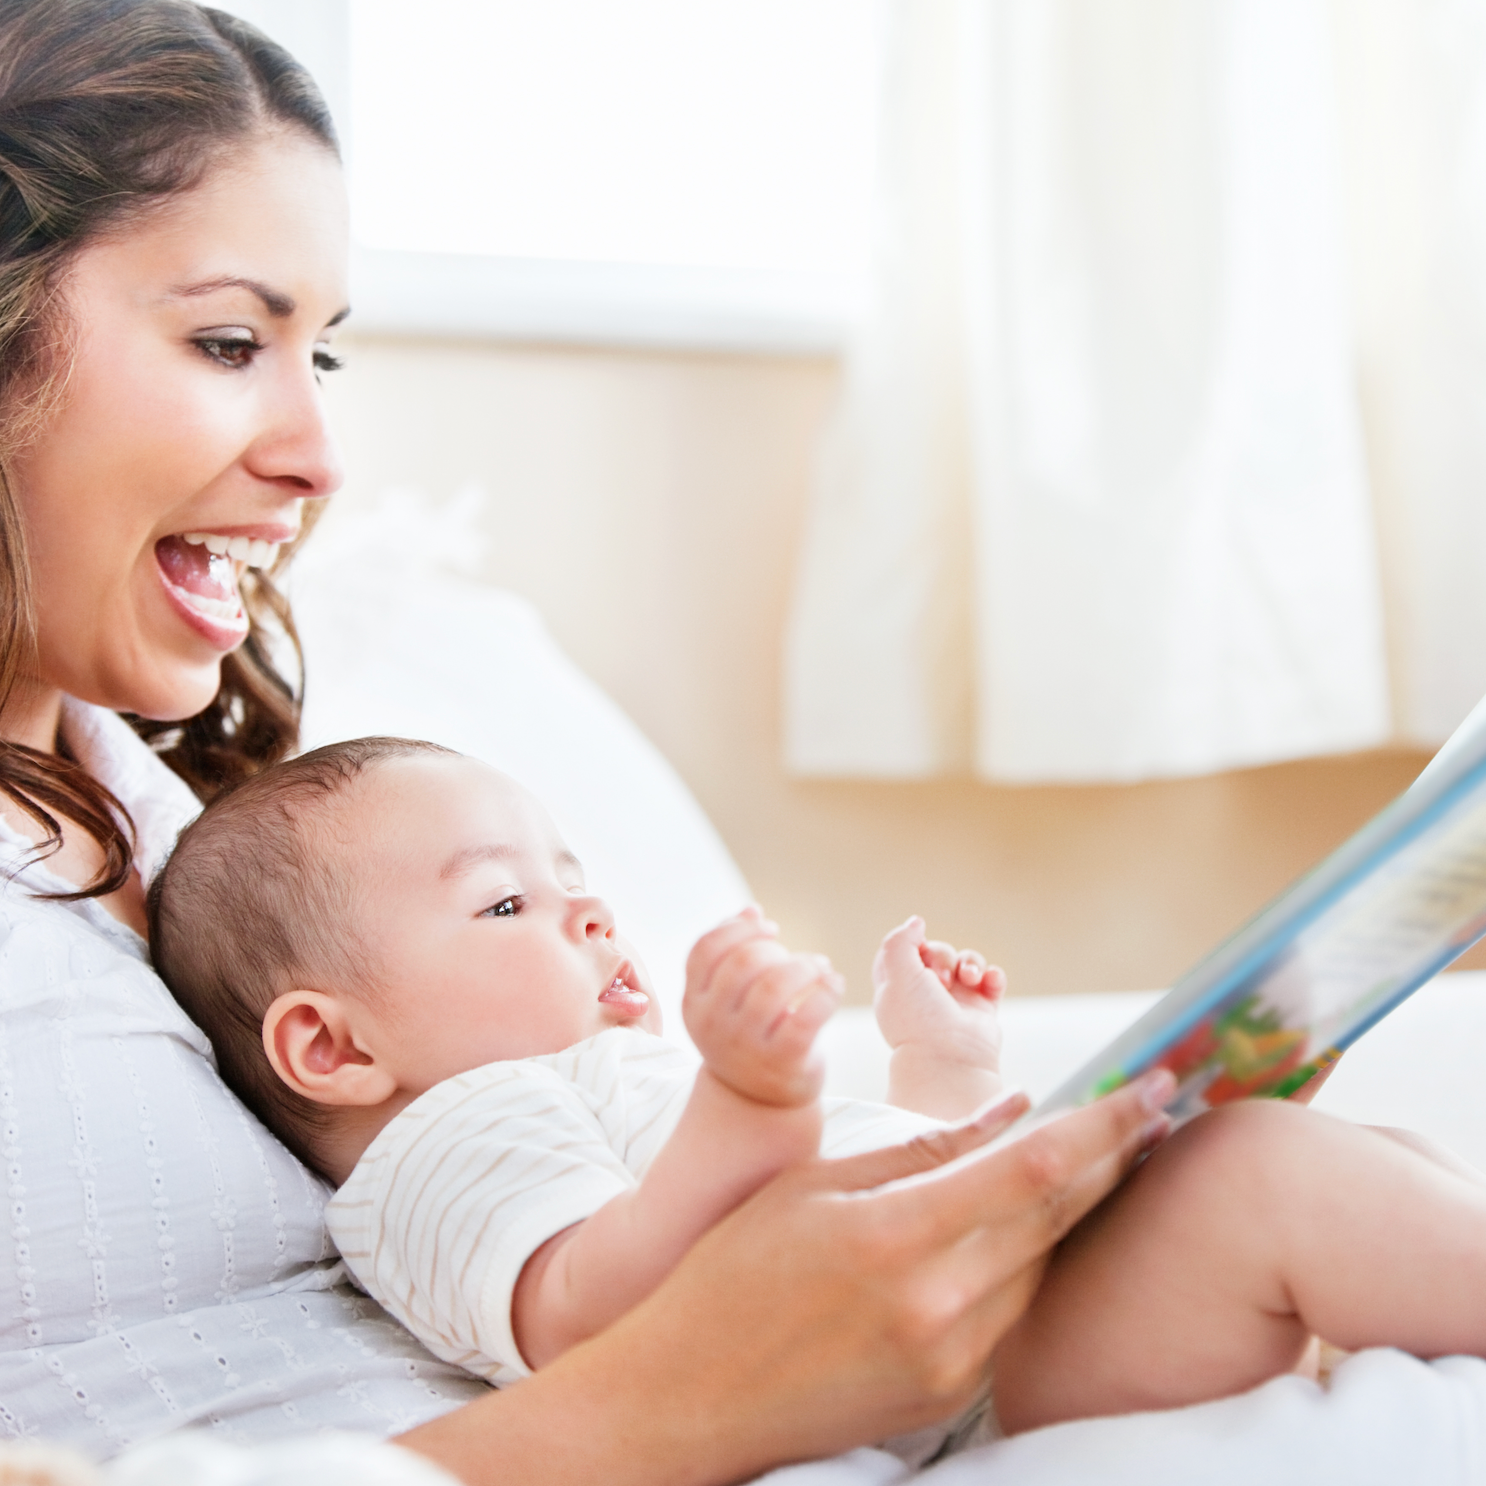 What Are the Best Baby Books?